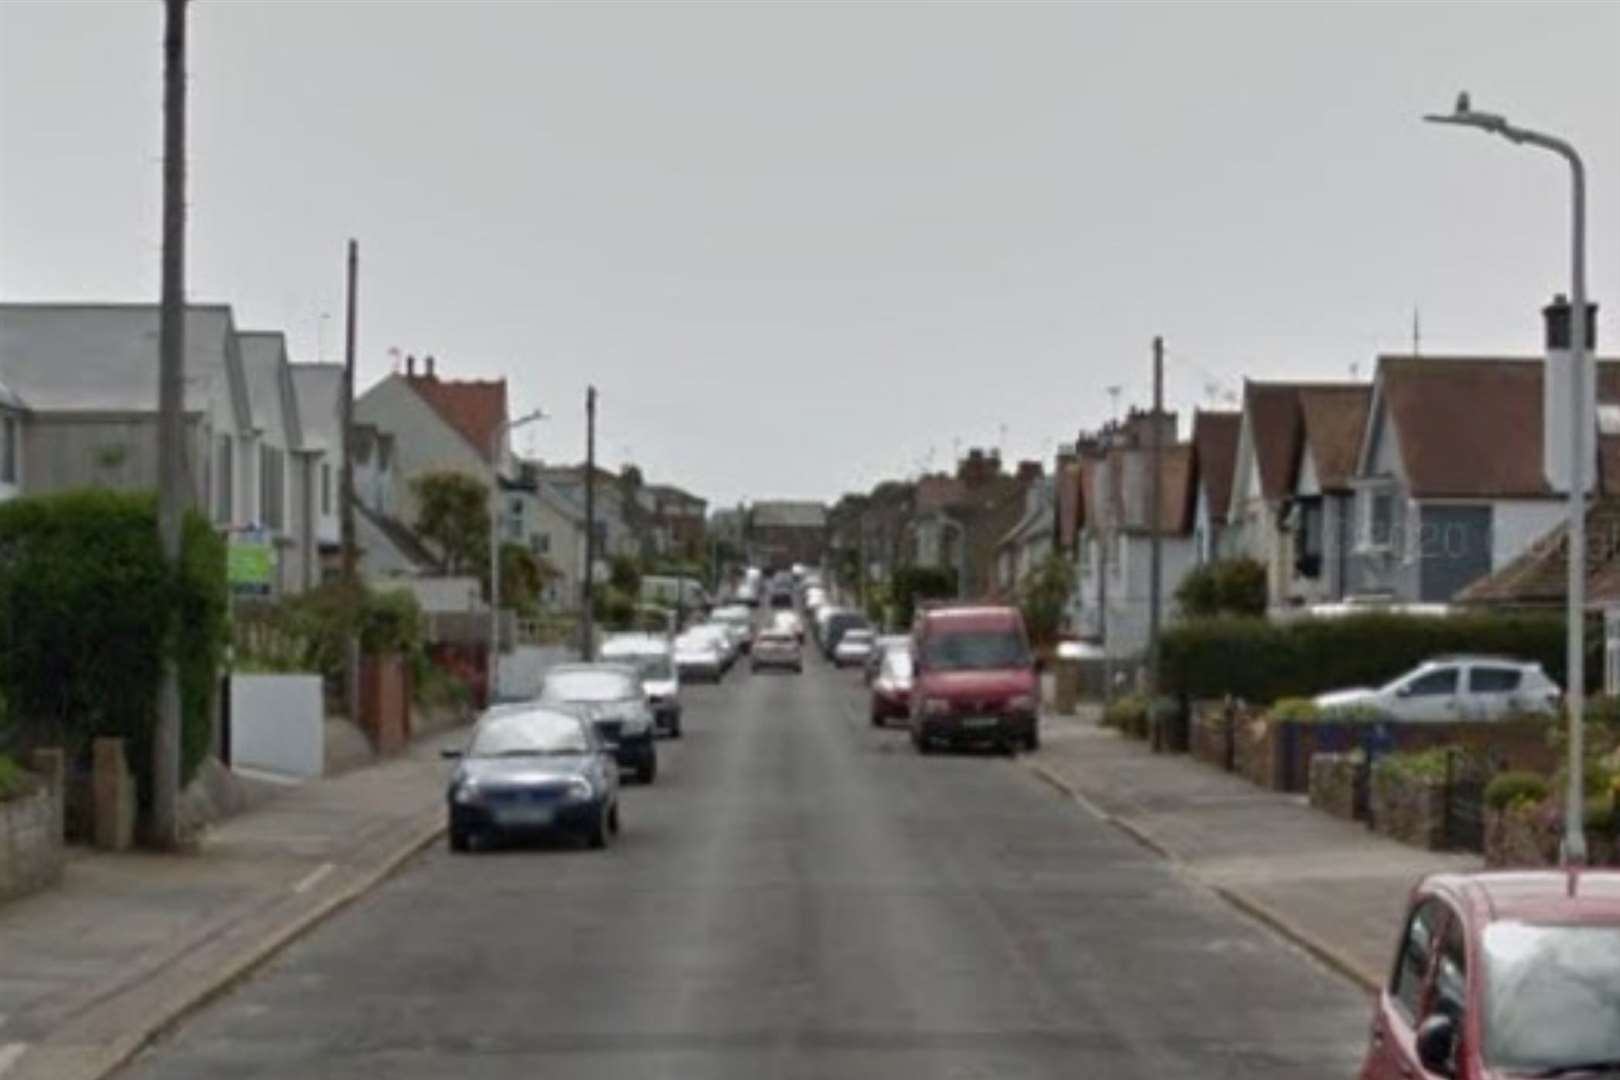 The incident happened in Percy Avenue, Broadstairs. Picture: Google Street View